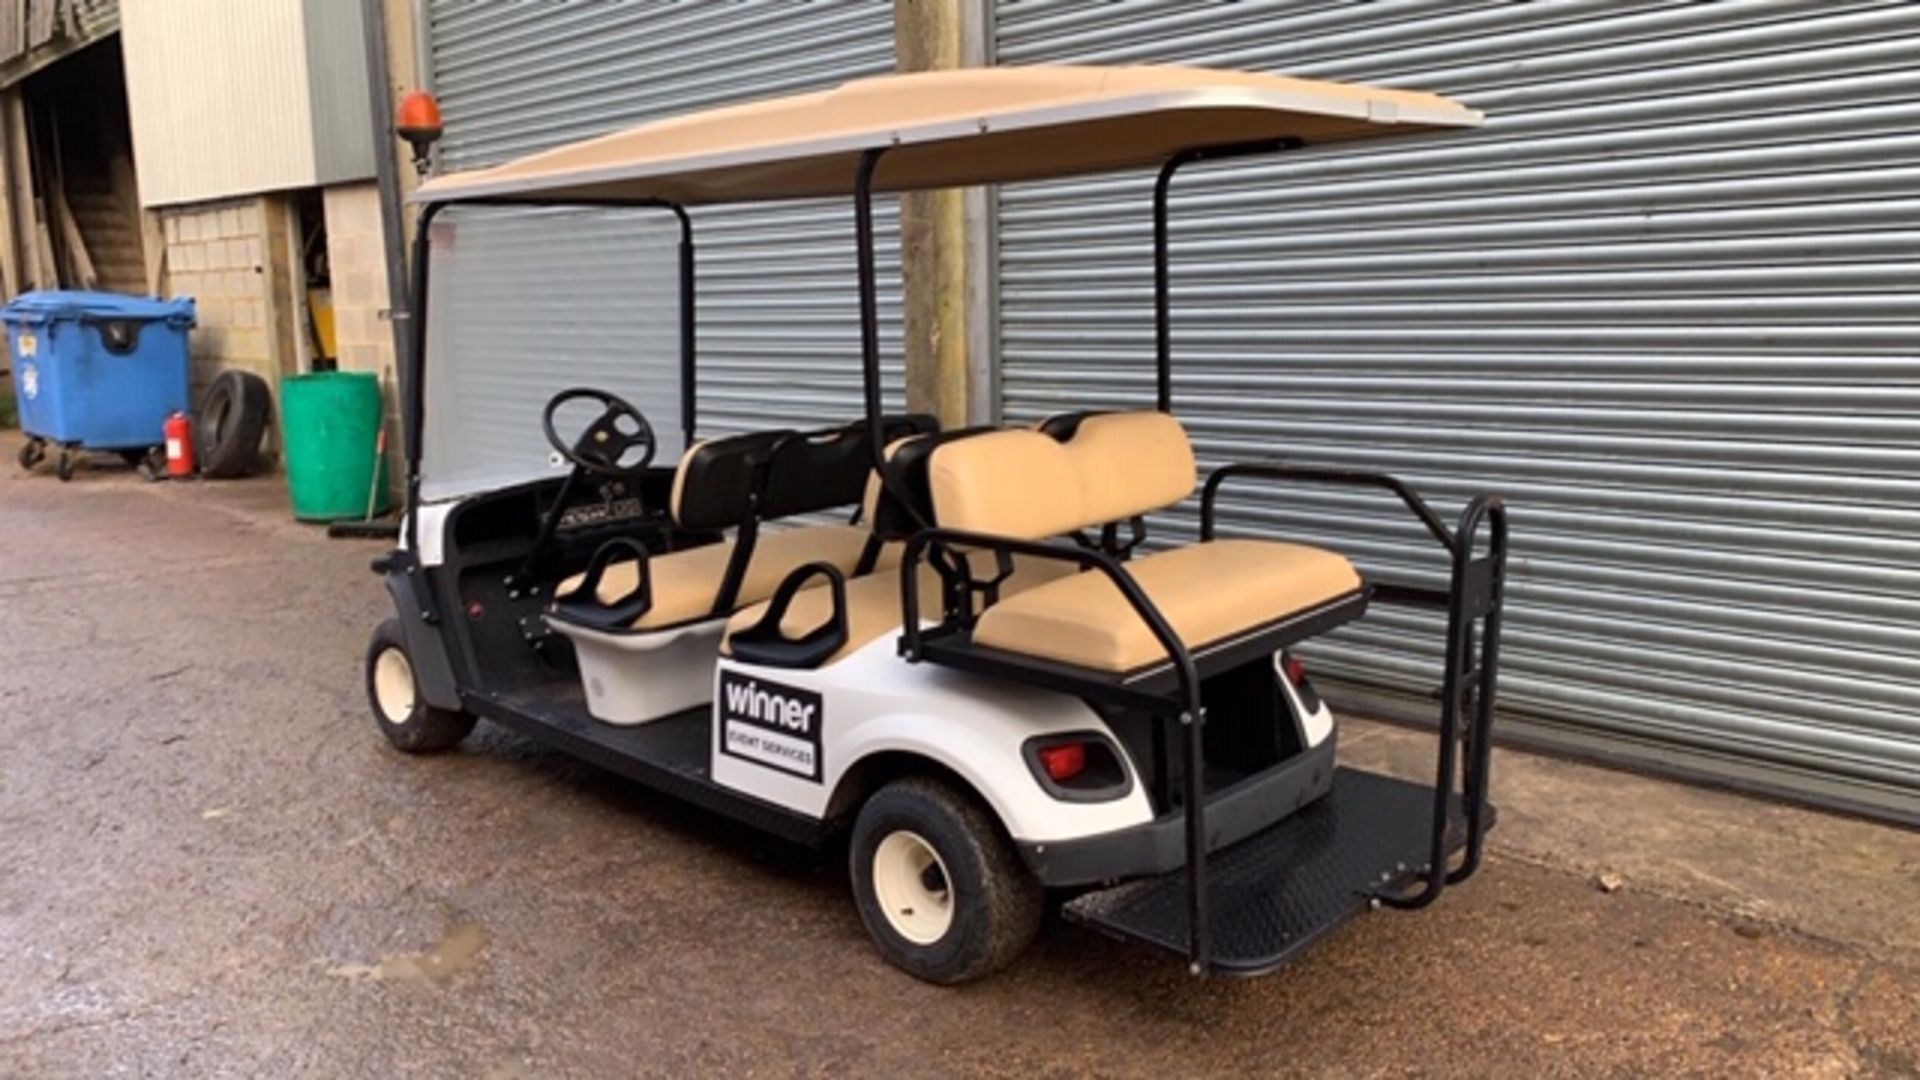 CUSHMAN EZGO SHUTTLE 6 PETROL ENGINED 6 SEATER GOLF / EVENTS BUGGY. YEAR 2017 BUILD. UNKNOWN REC - Image 3 of 5